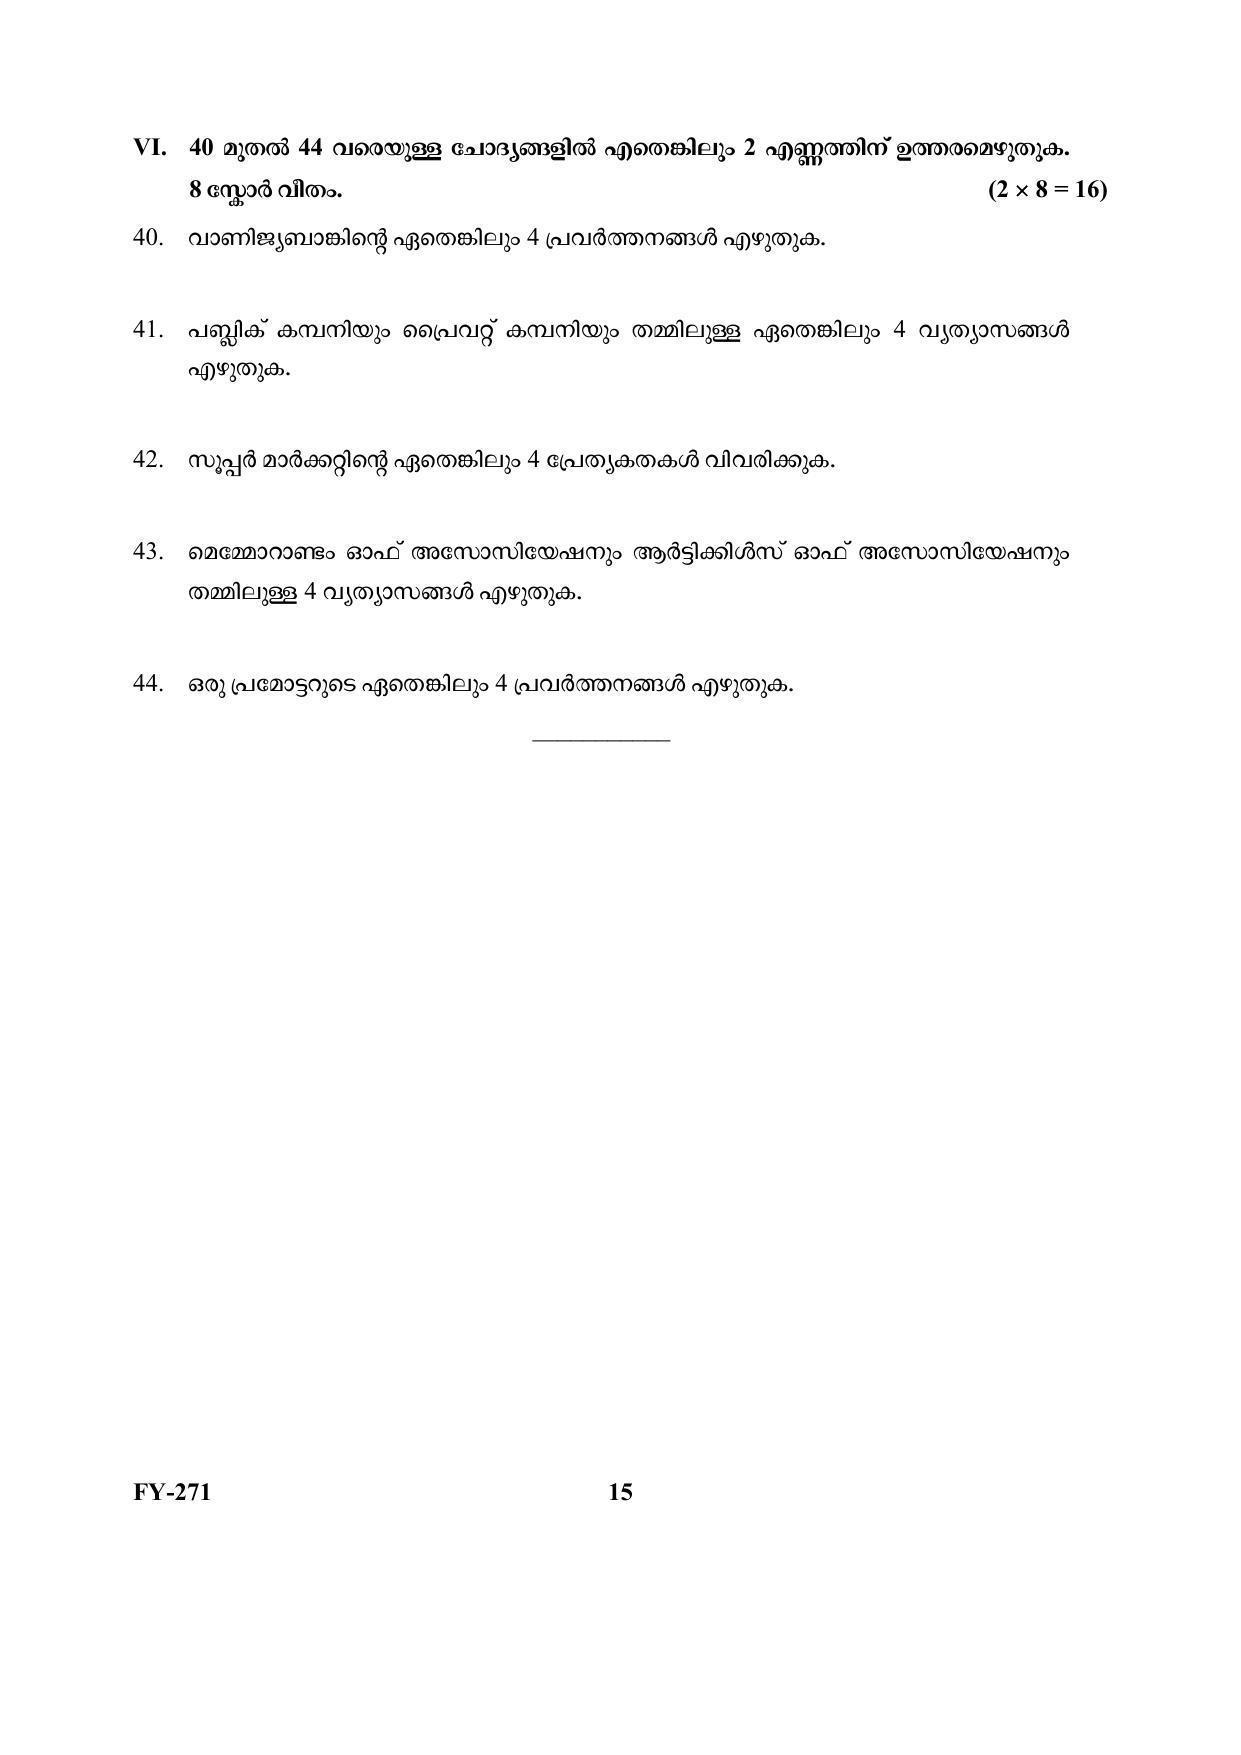 Kerala Plus One (Class 11th) Business Studies -Hearing Impaired Question Paper 2021 - Page 15